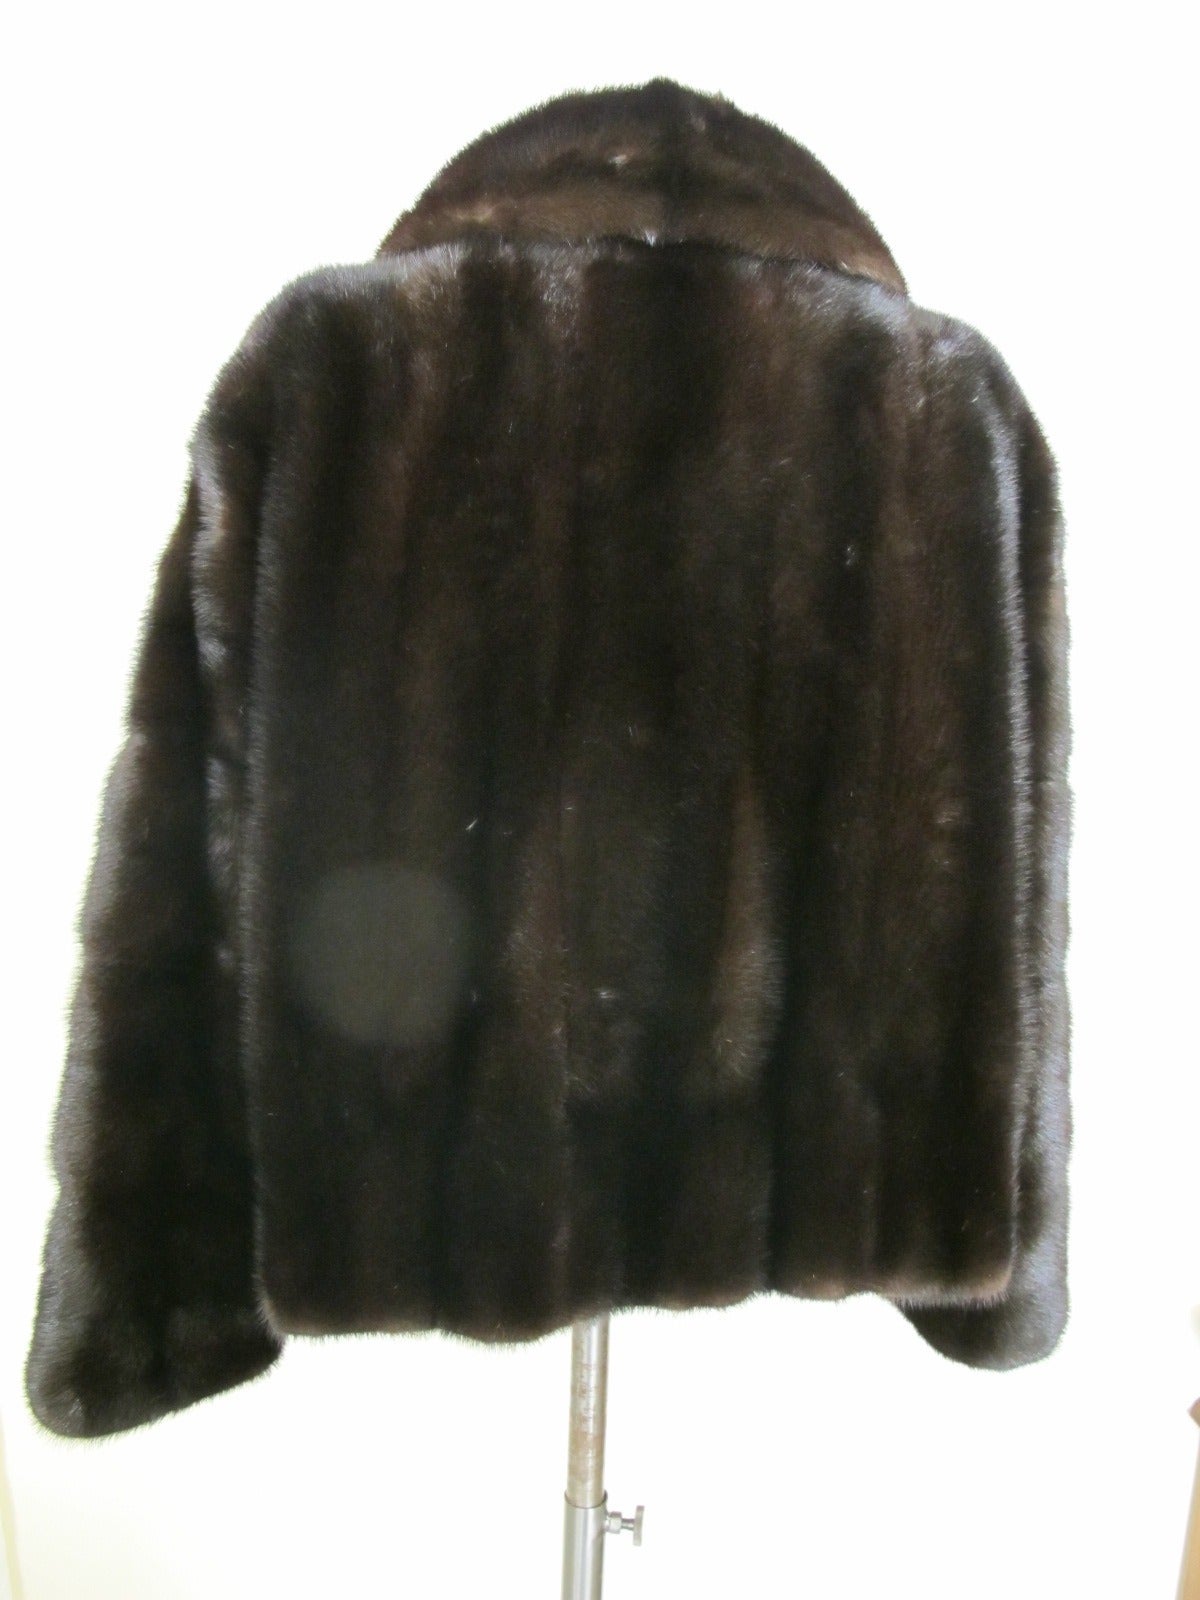 Ranch Mink Open Jacket With Pockets For Sale 1